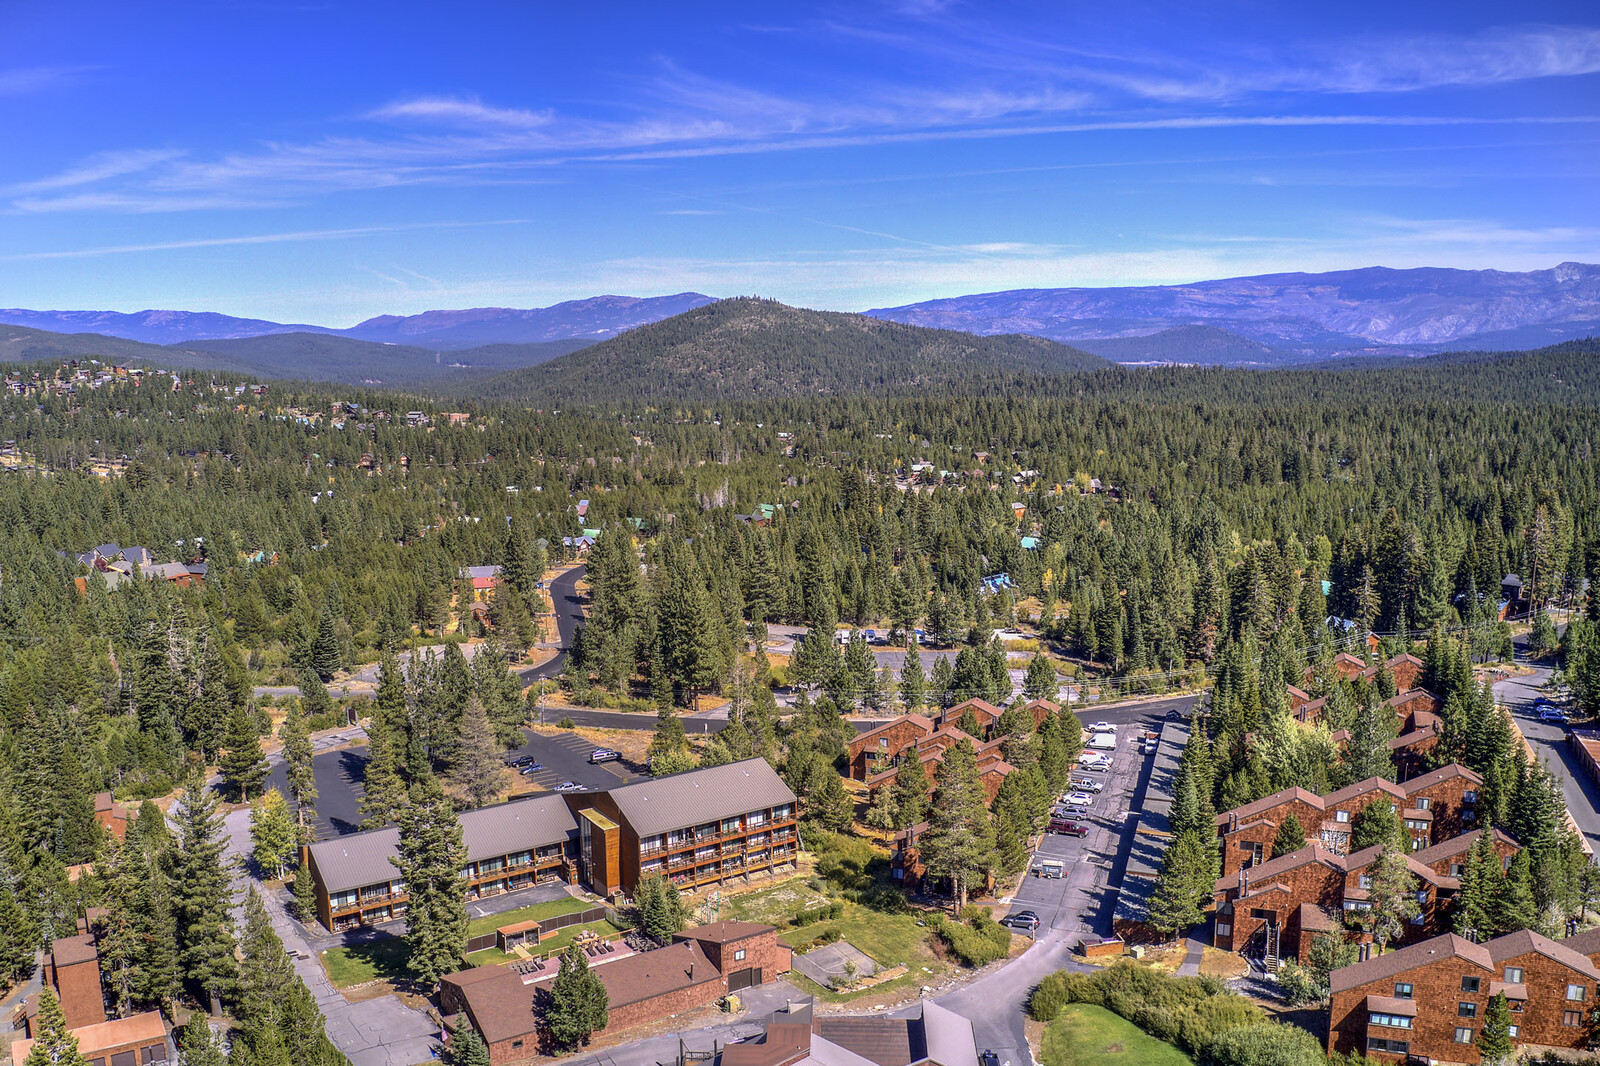 Tahoe Donner Low Elevation arial view